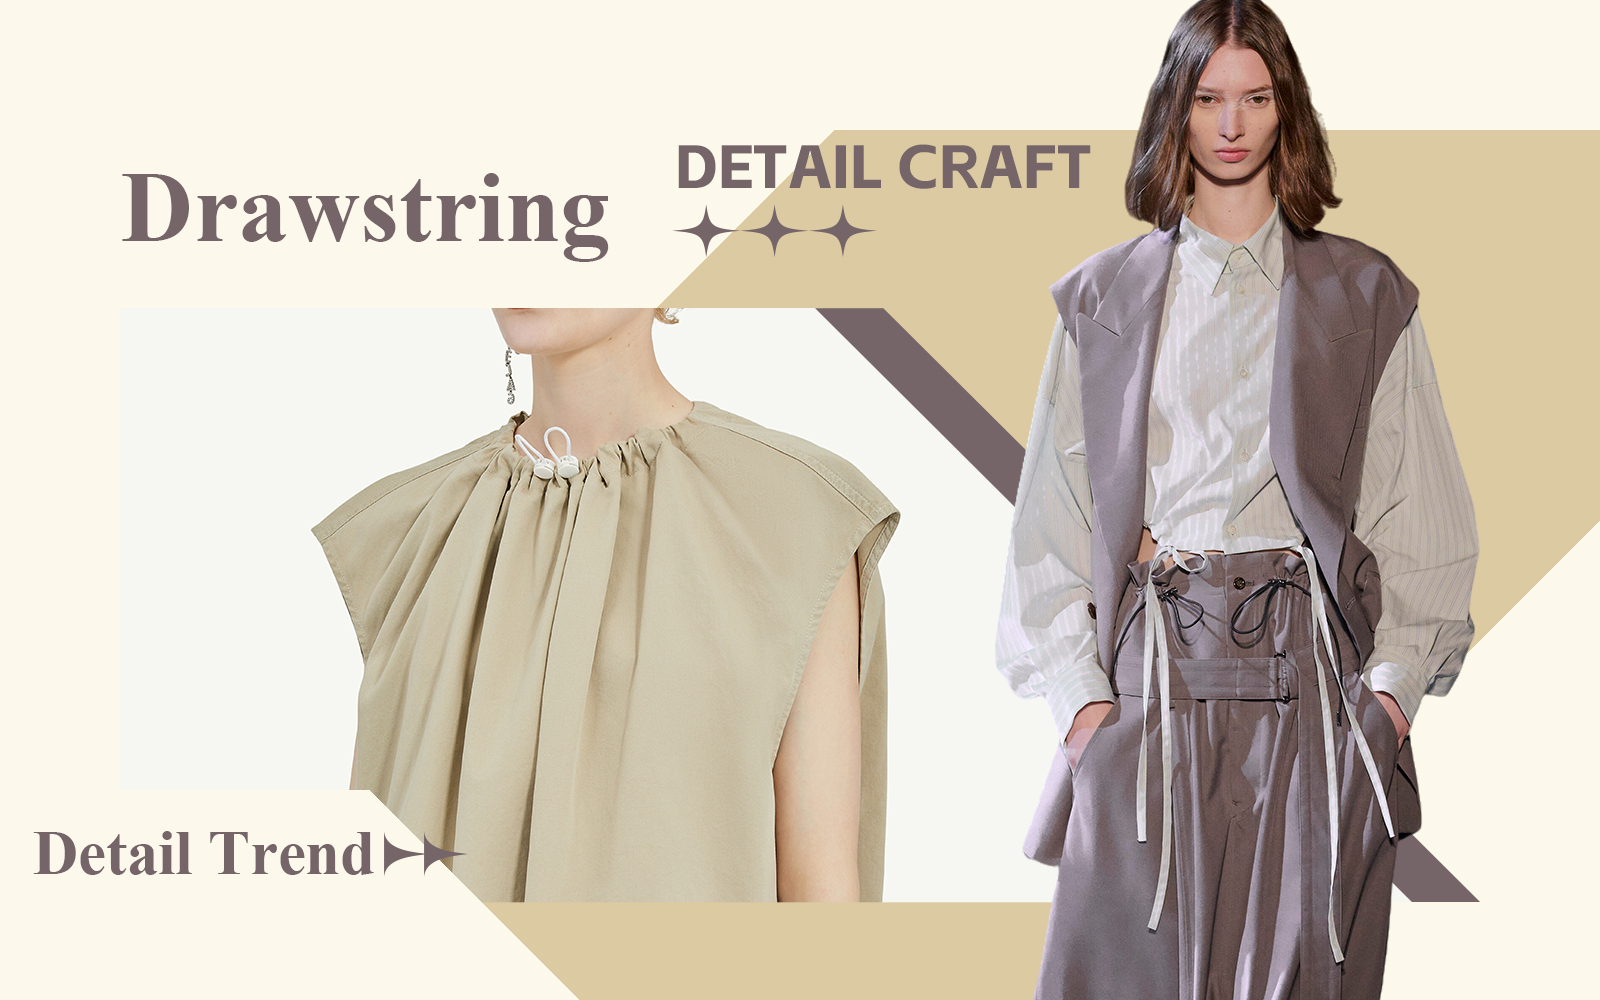 Drawstring -- The Detail & Craft Trend for Womenswear